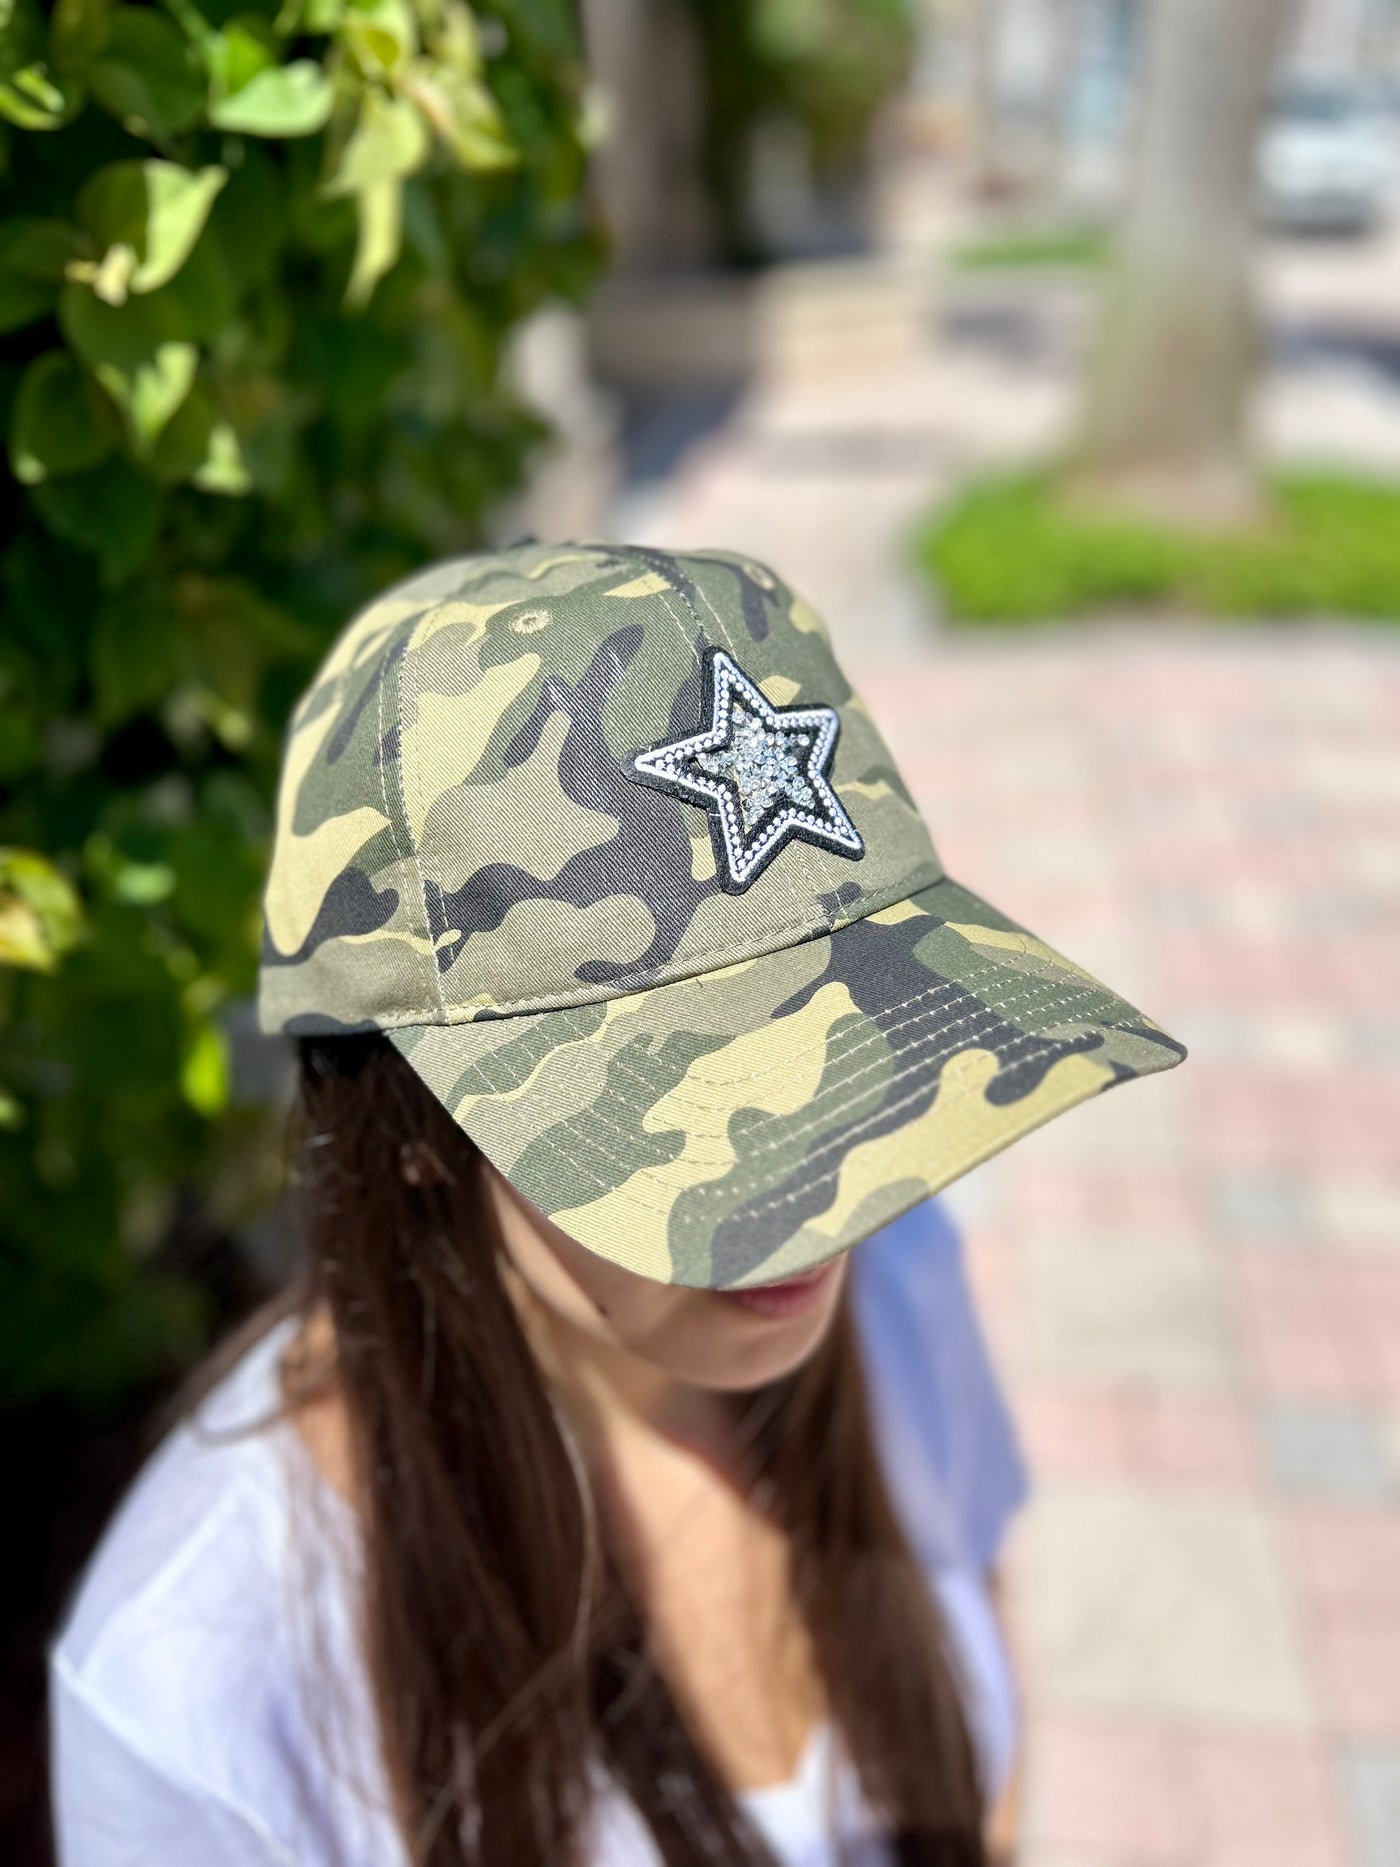 You’re A Star Baseball Hat